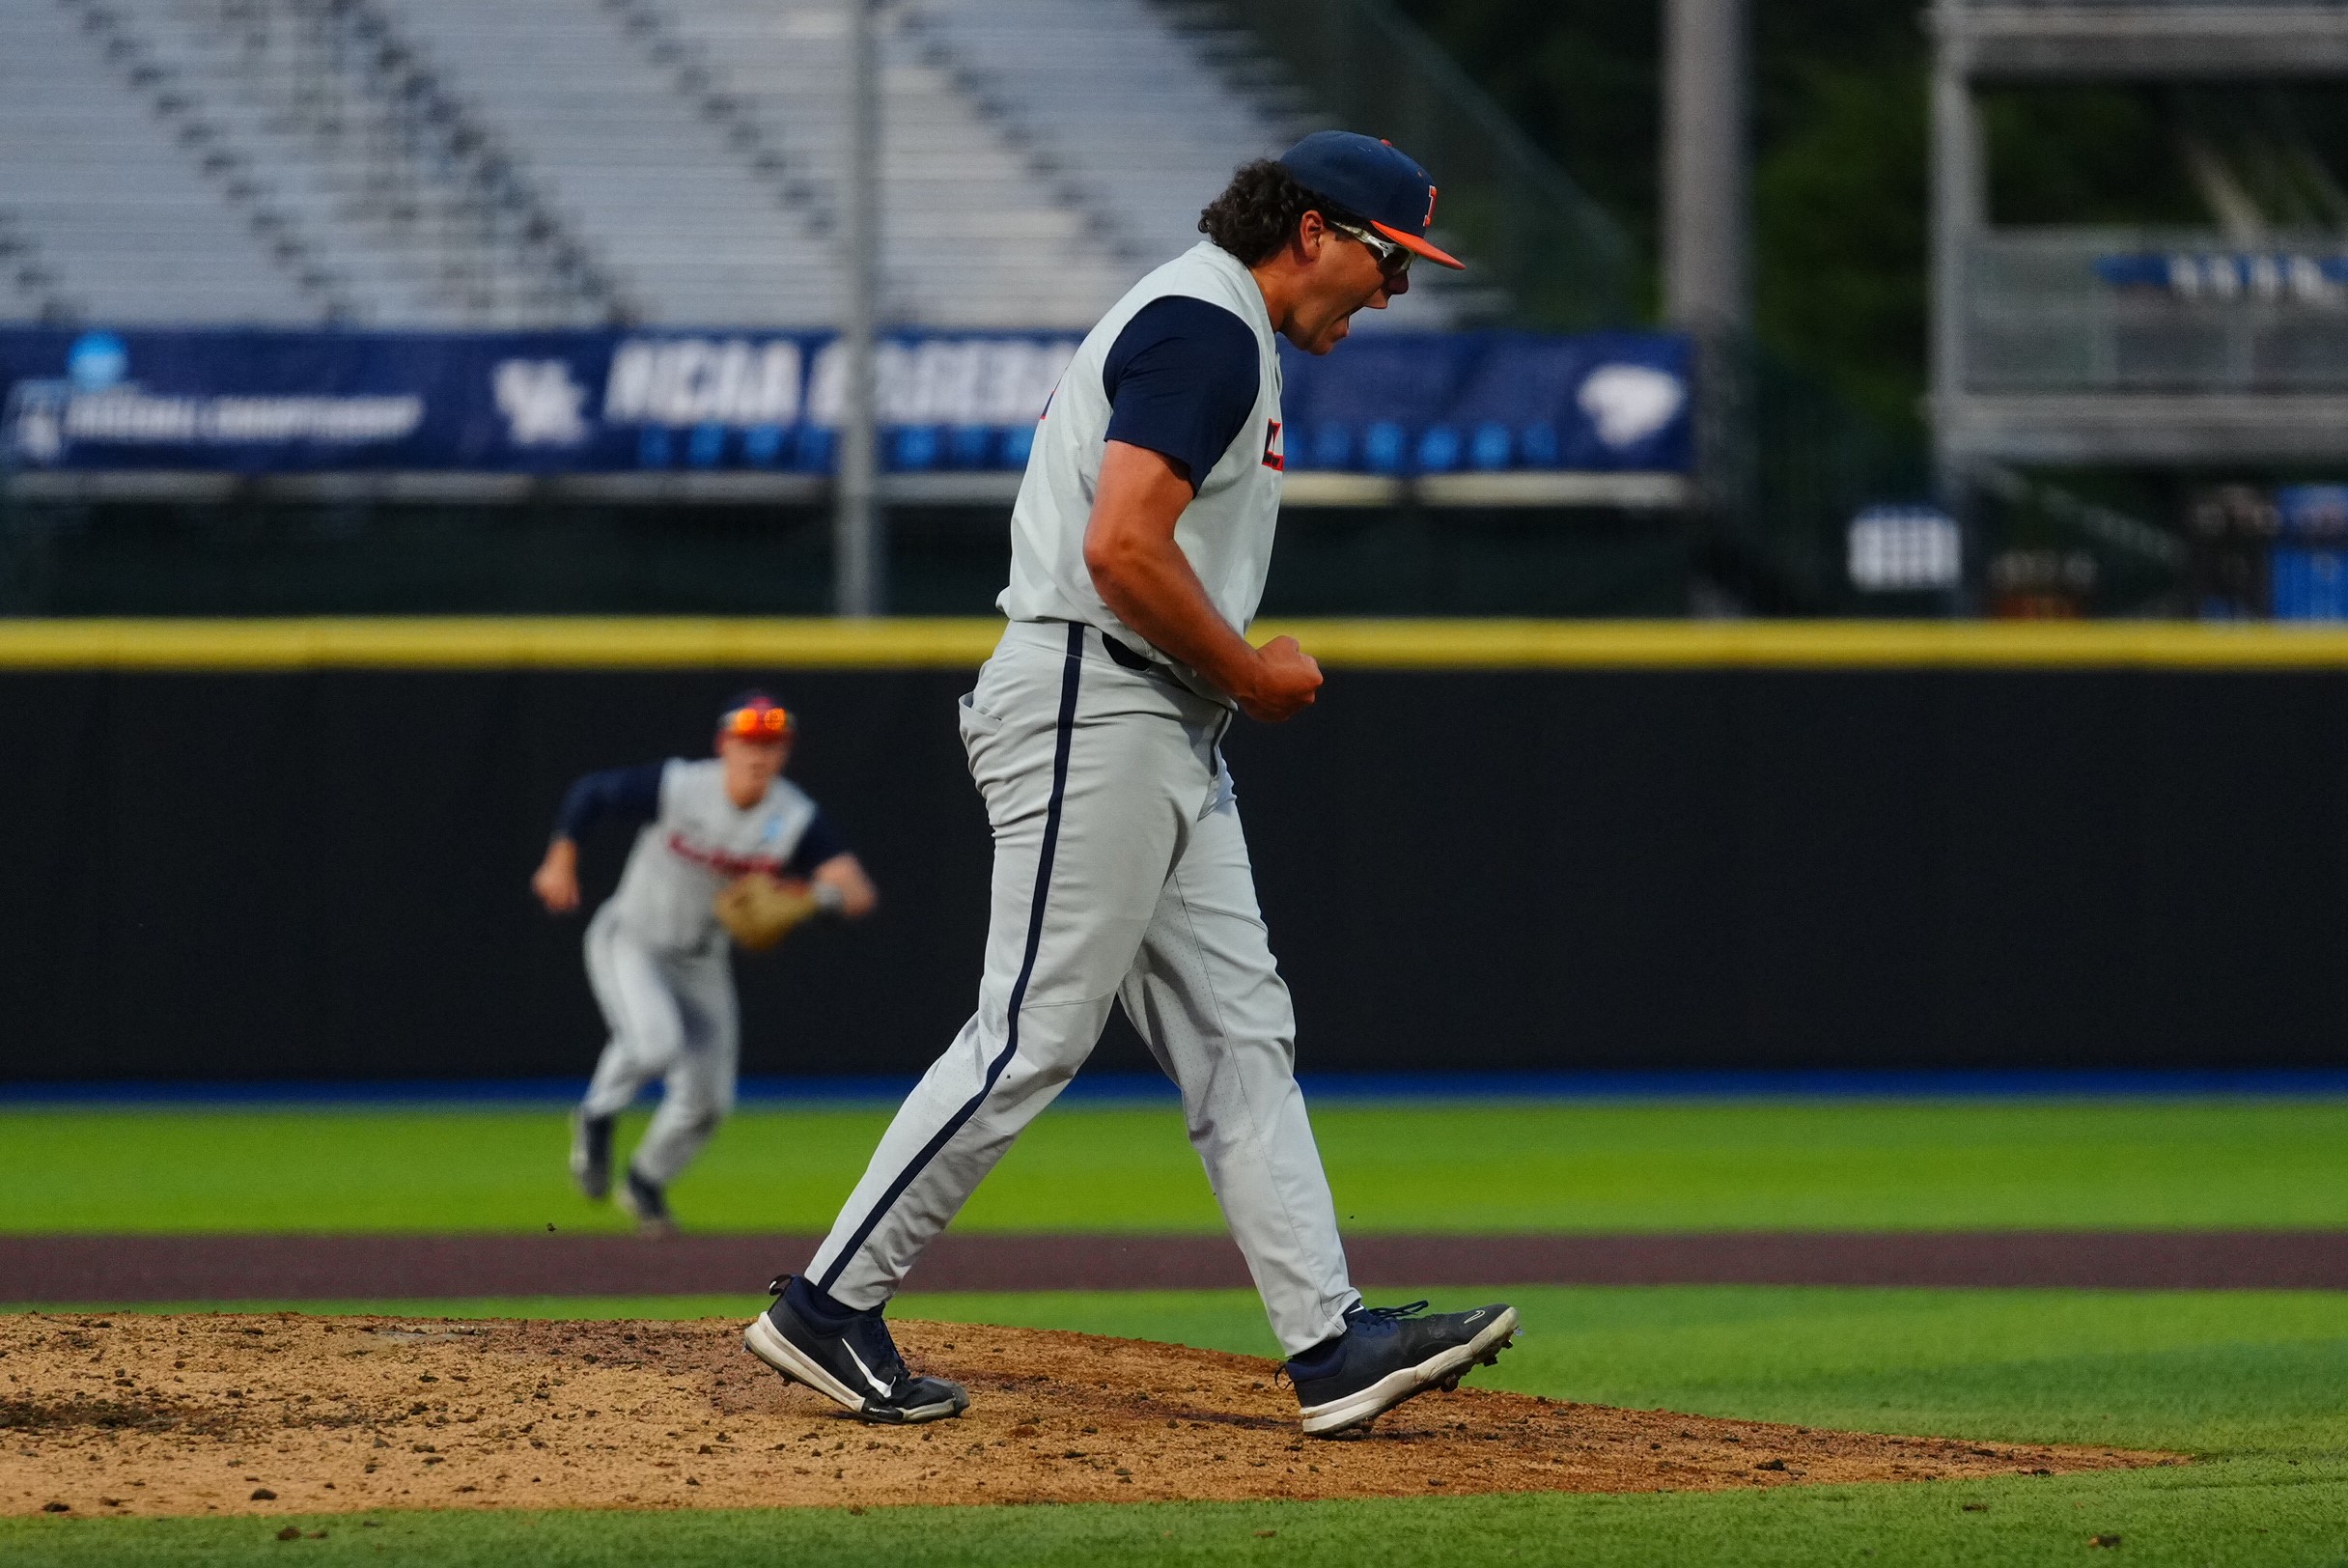 ‘Big Ticket’ Jack Crowder Drafted in 9th Round by Baltimore Orioles